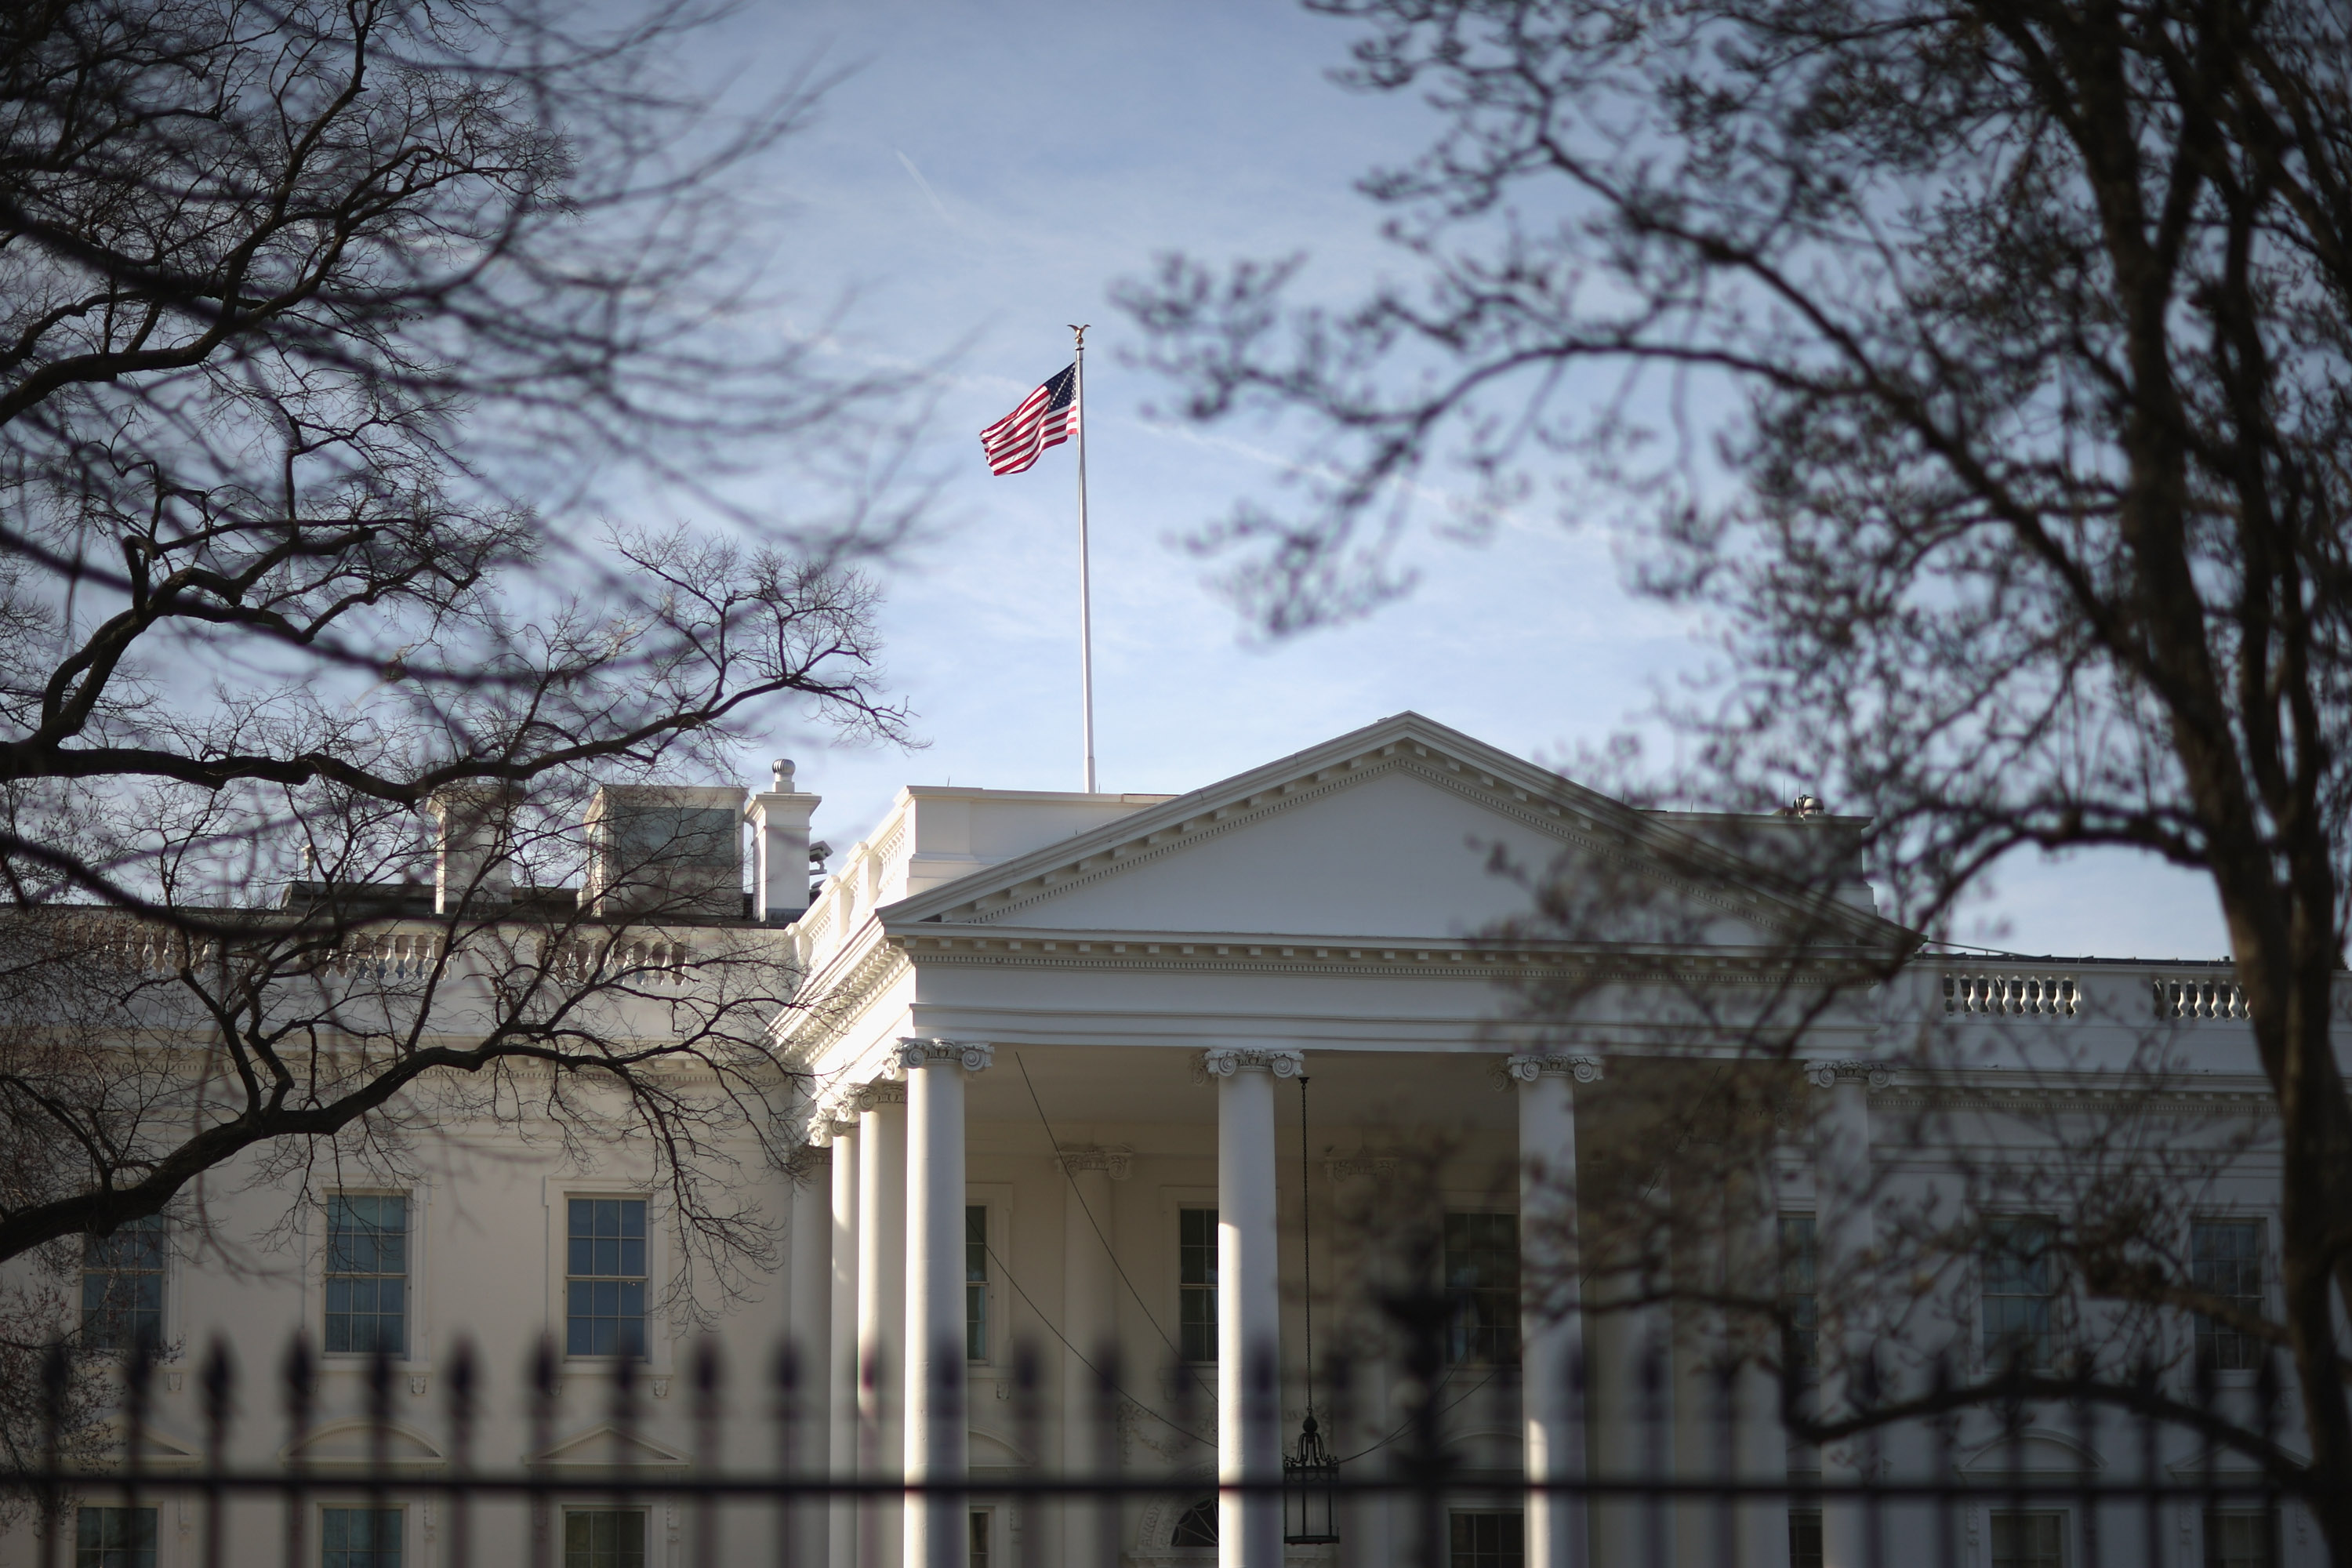 Letter Intended For White House Tests Positive For Cyanide